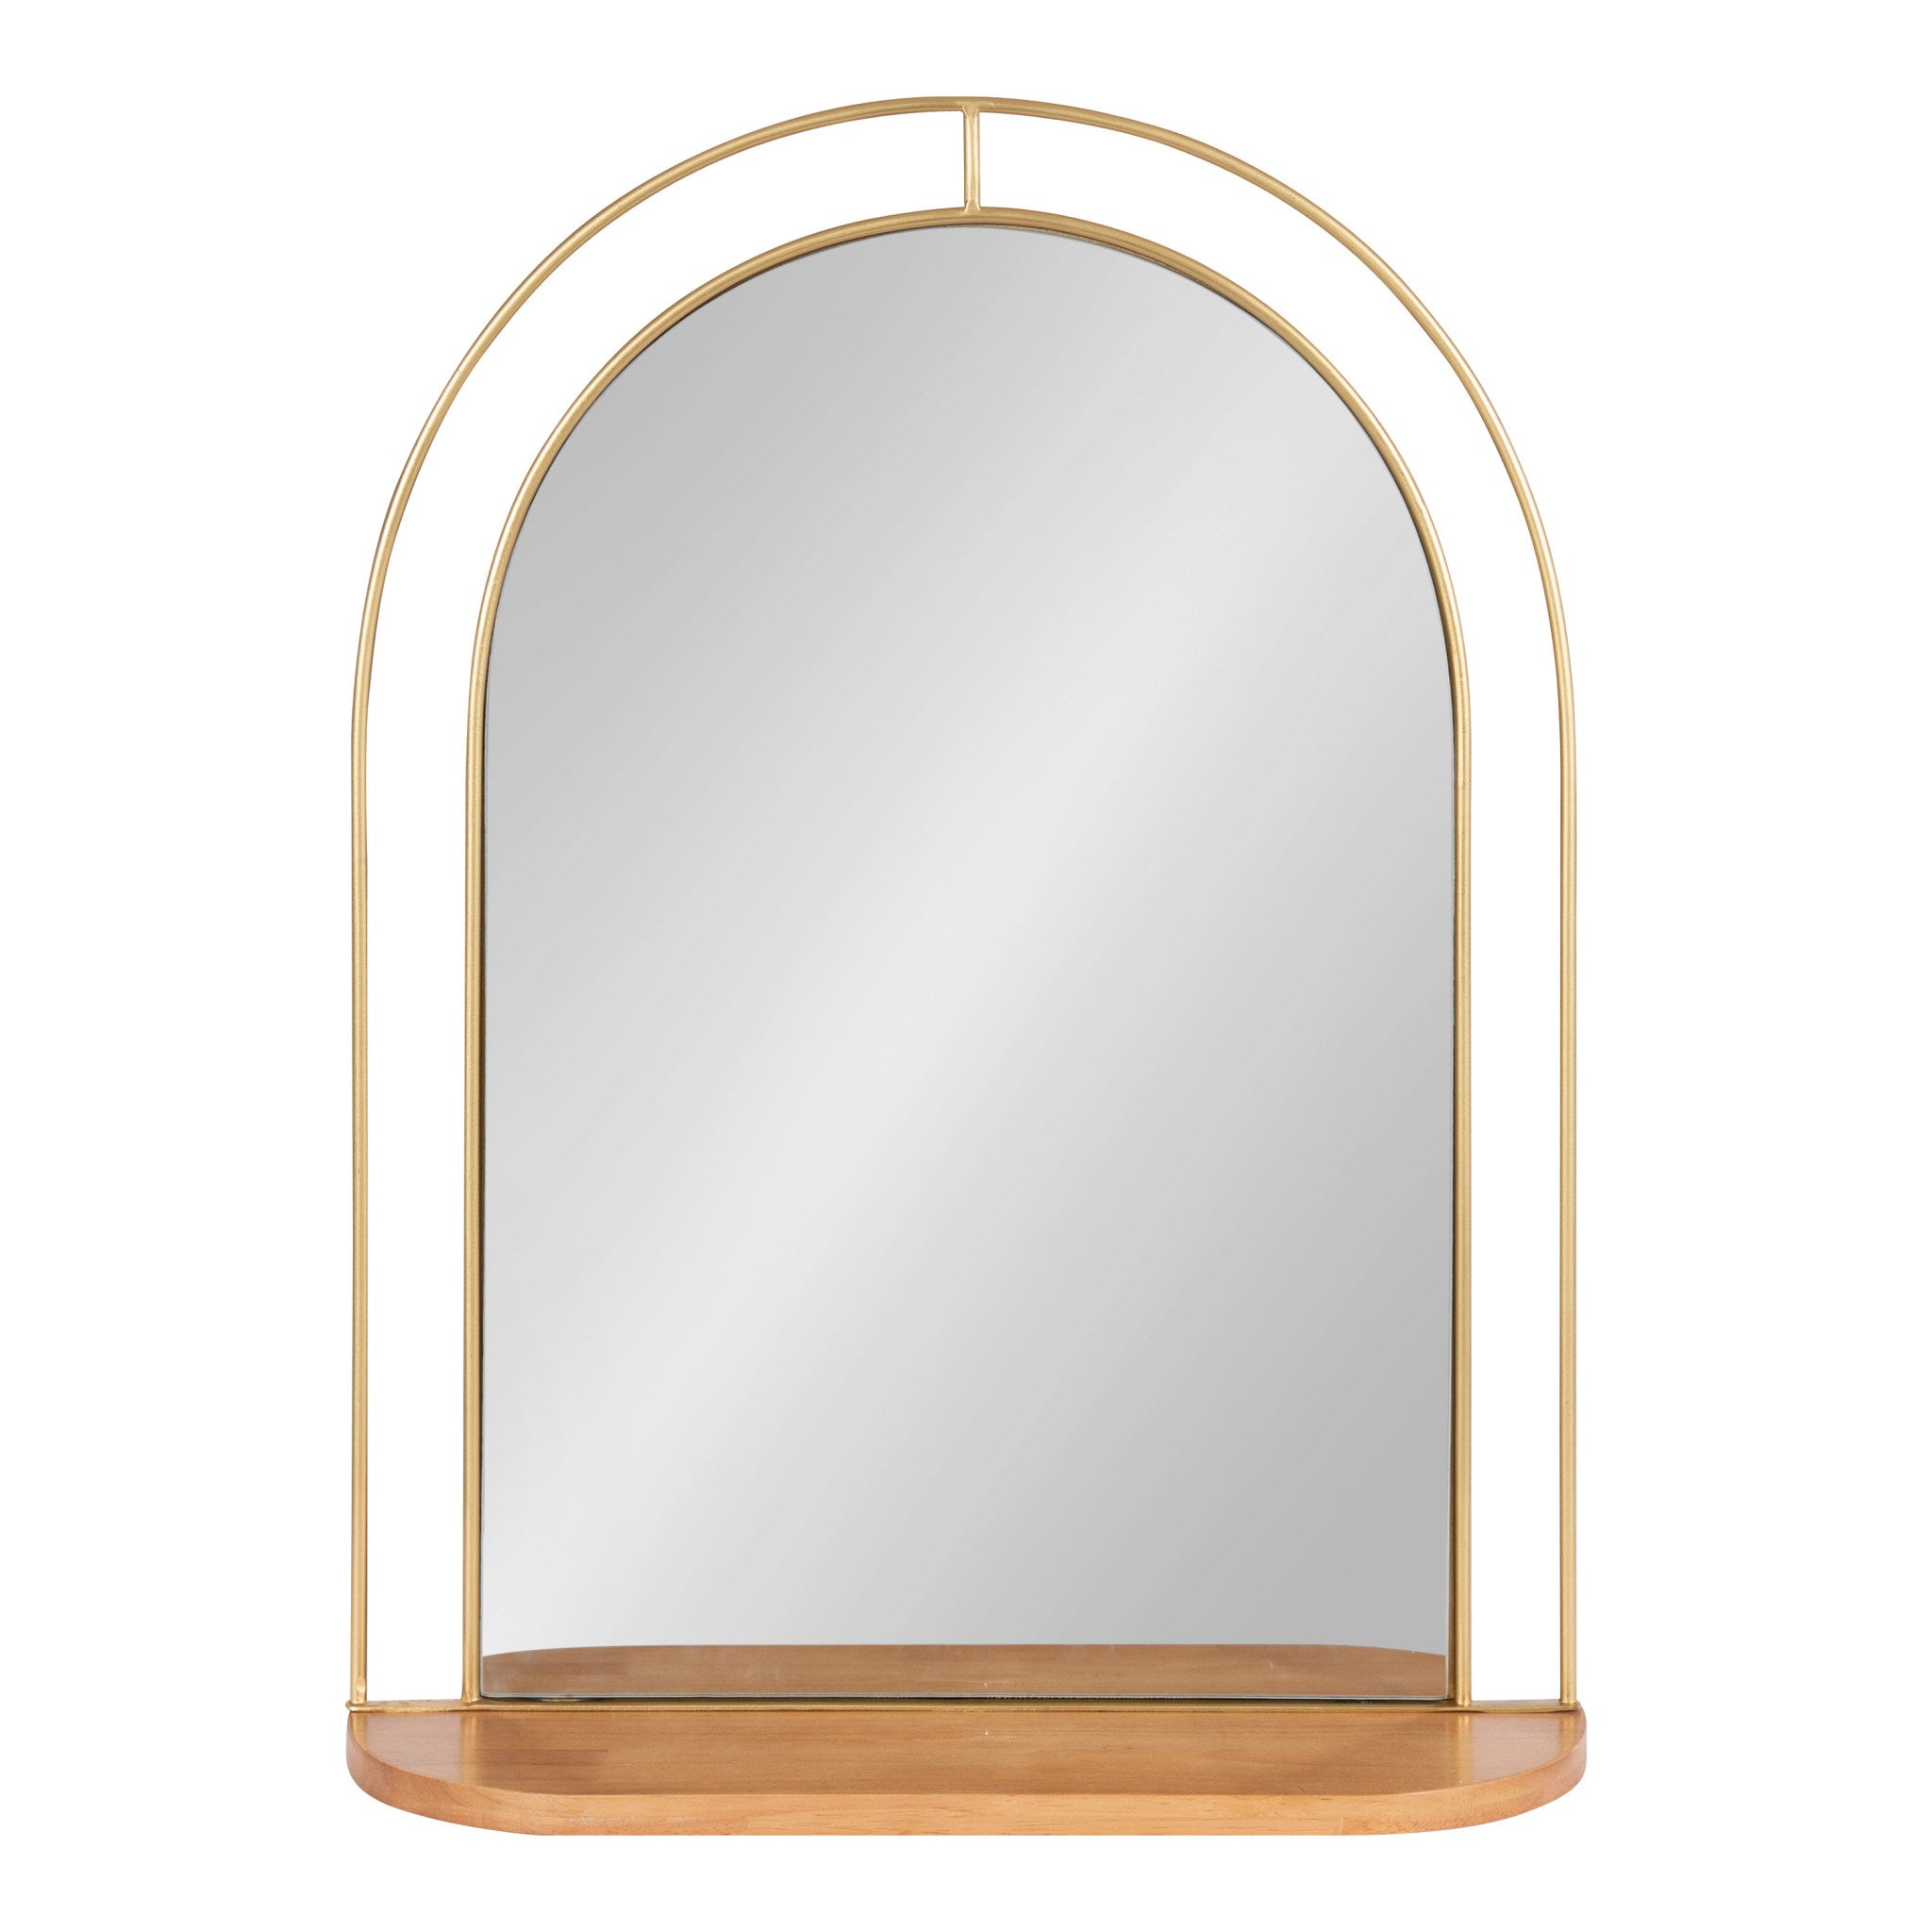 Reverie Framed Wall Mirror with Shelf